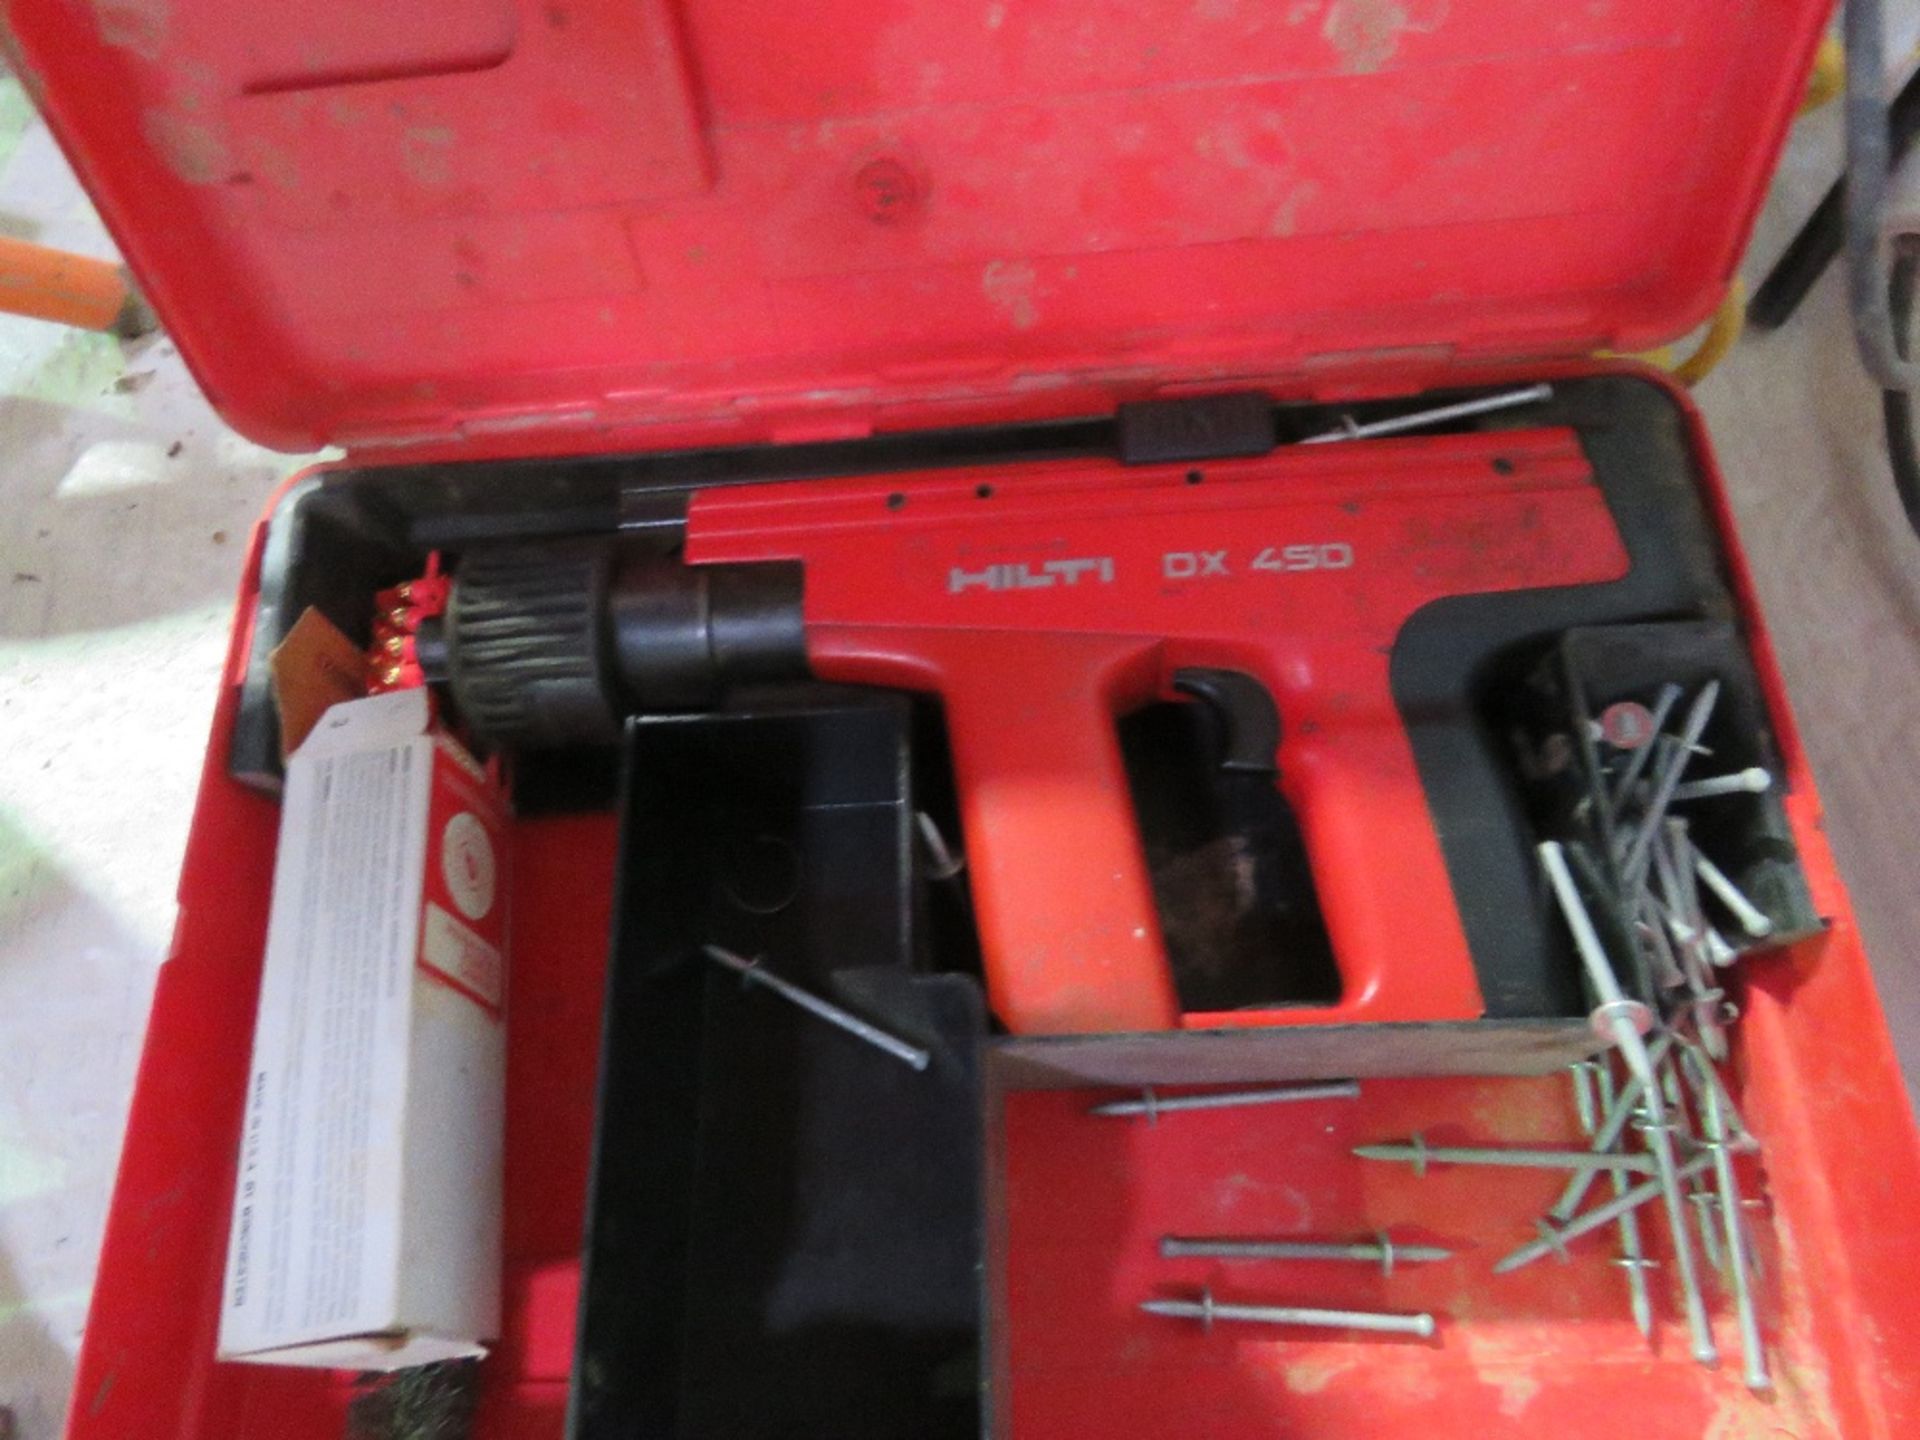 2 X HILTI DX450 NAIL GUNS. DIRECT FROM LOCAL RETIRING BUILDER. THIS LOT IS SOLD UNDER THE AUCTI